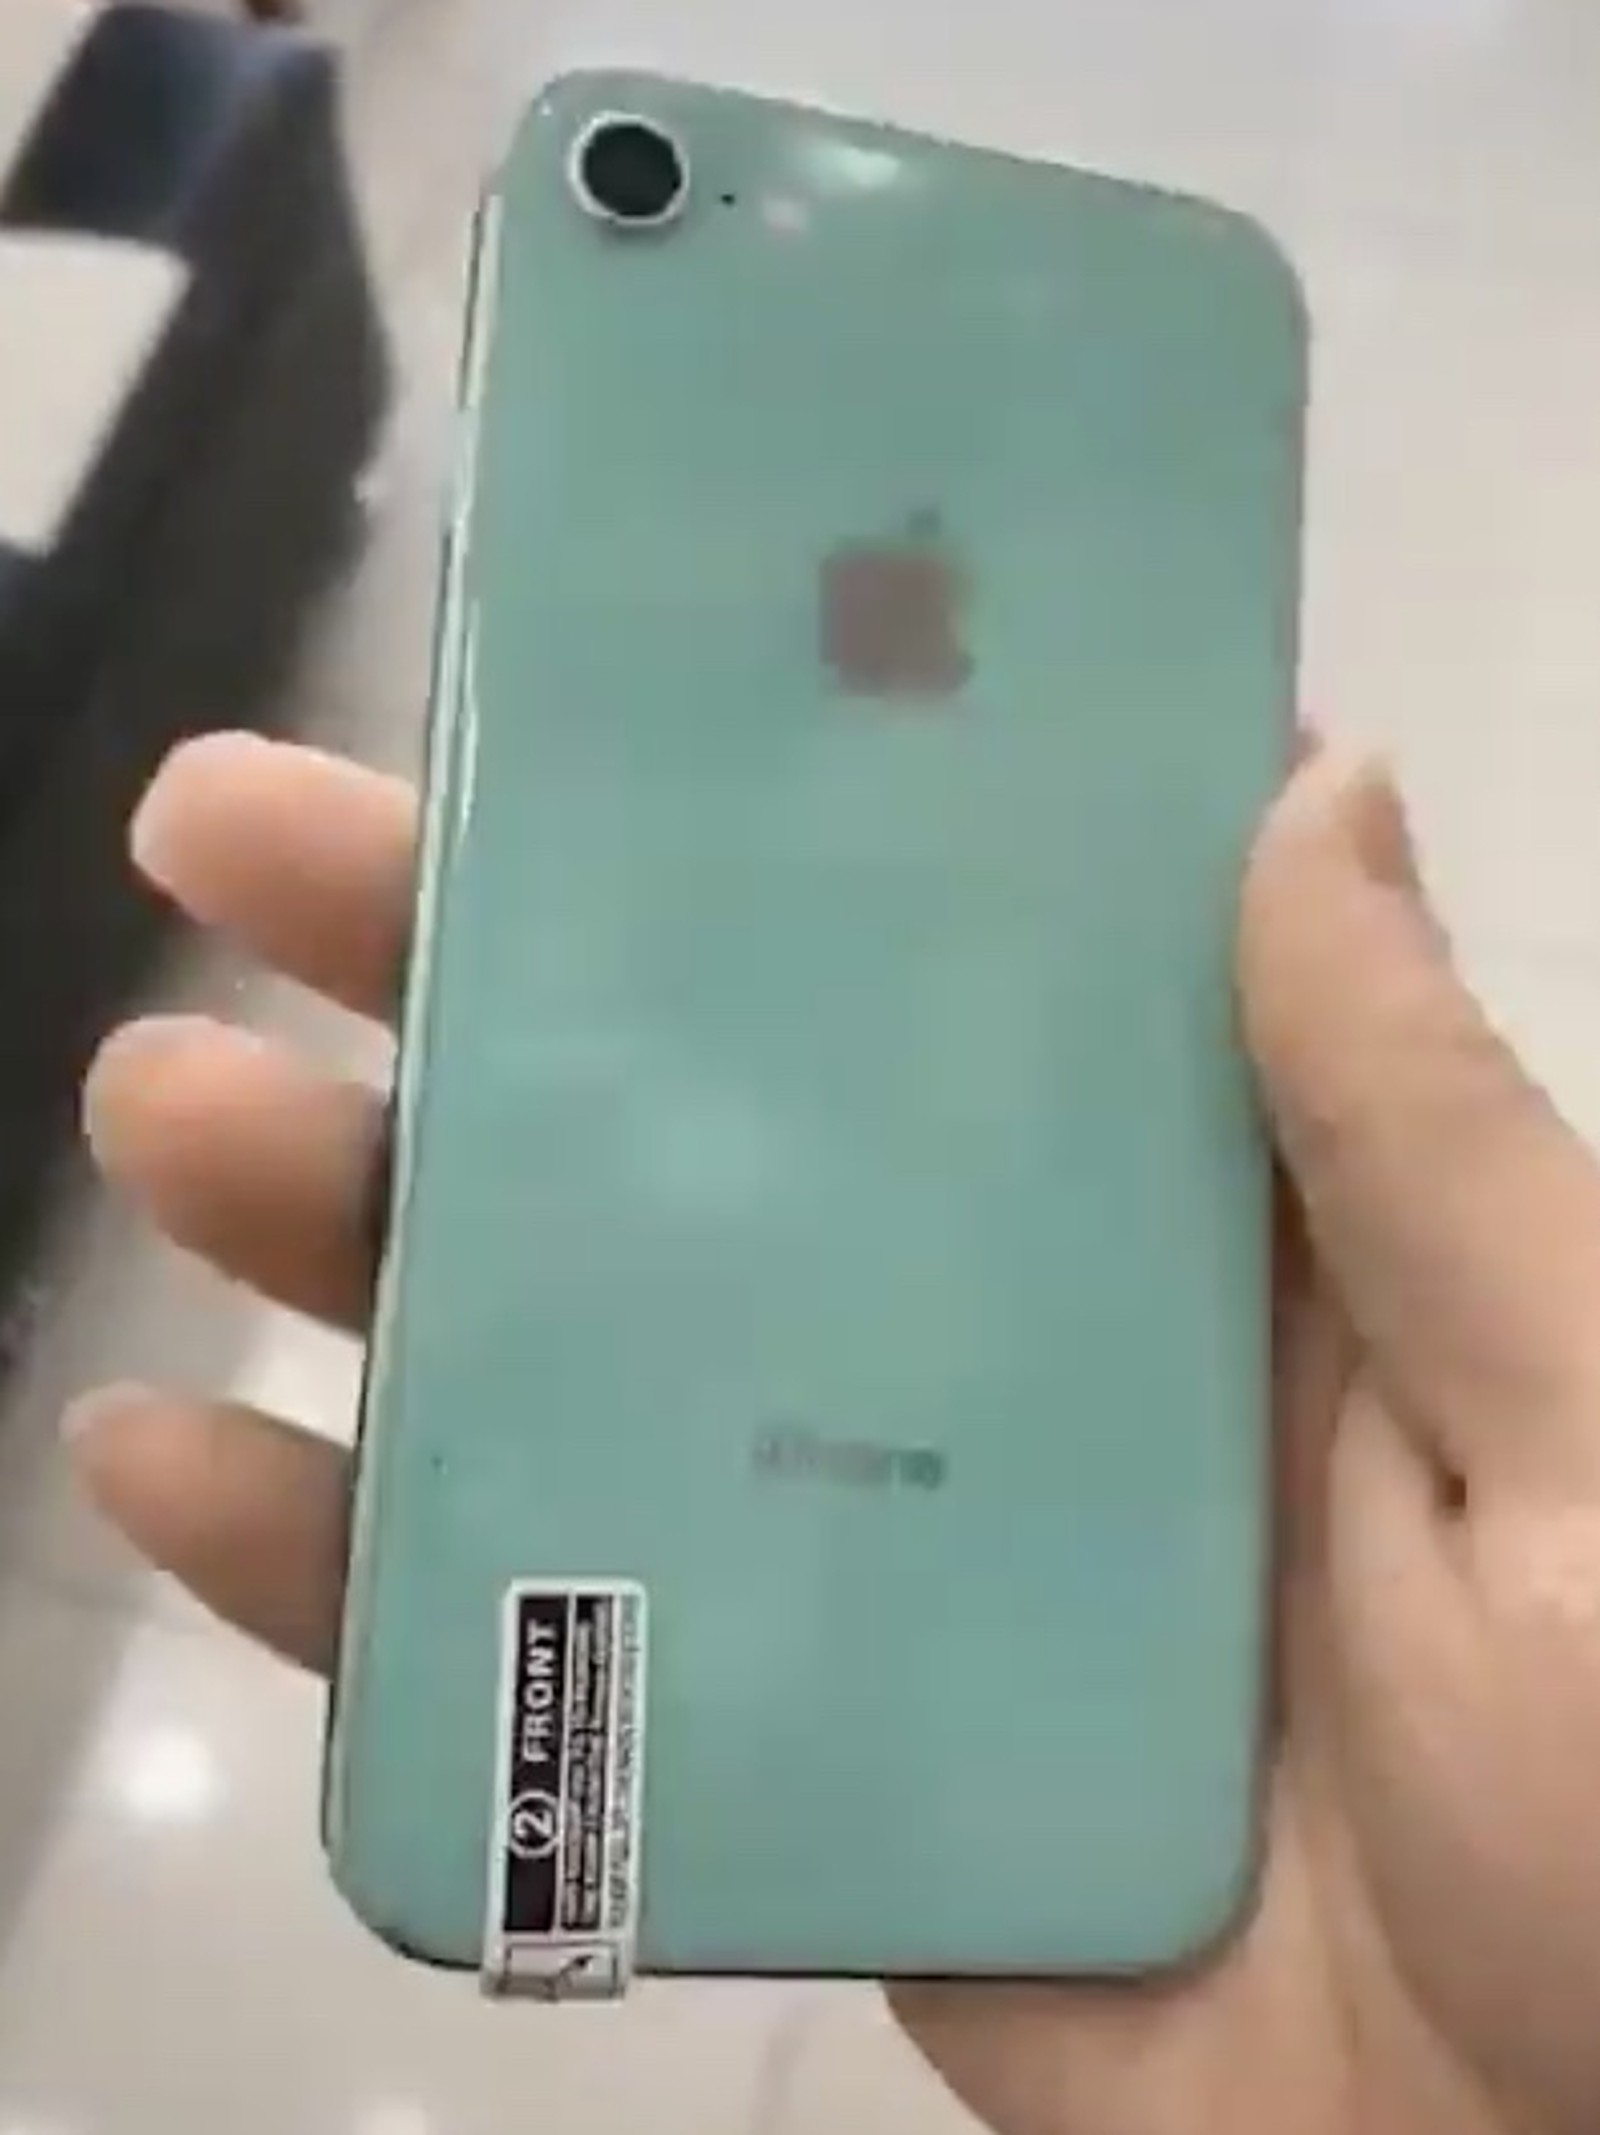 Video Depicts Alleged 'iPhone 9' But Design Doesn't Match Up With